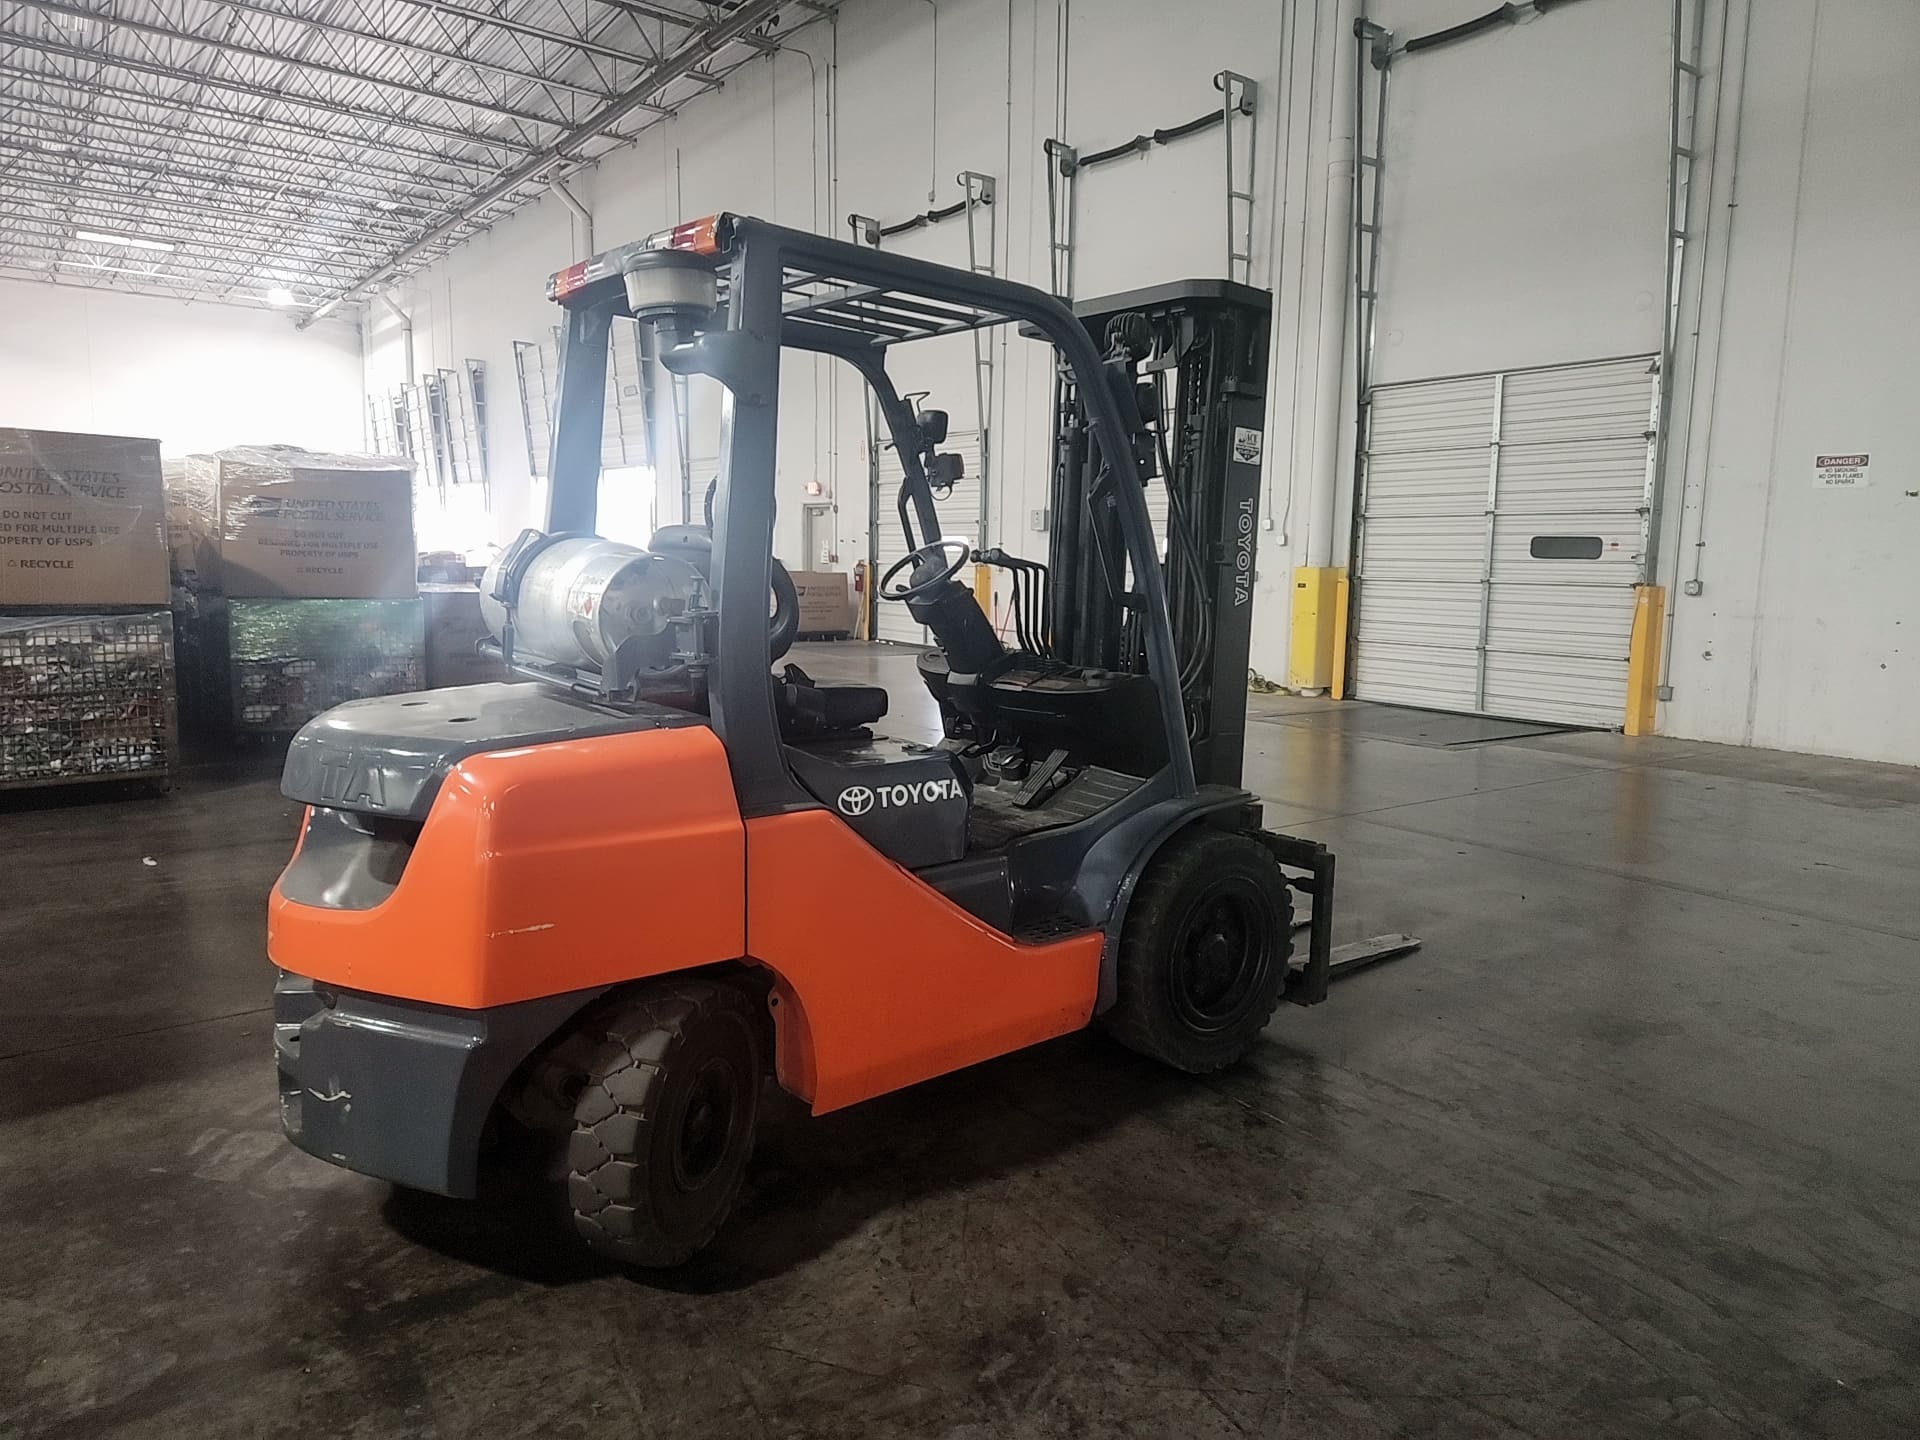 ACE Equipment - Irving, TX, US, forklifts
